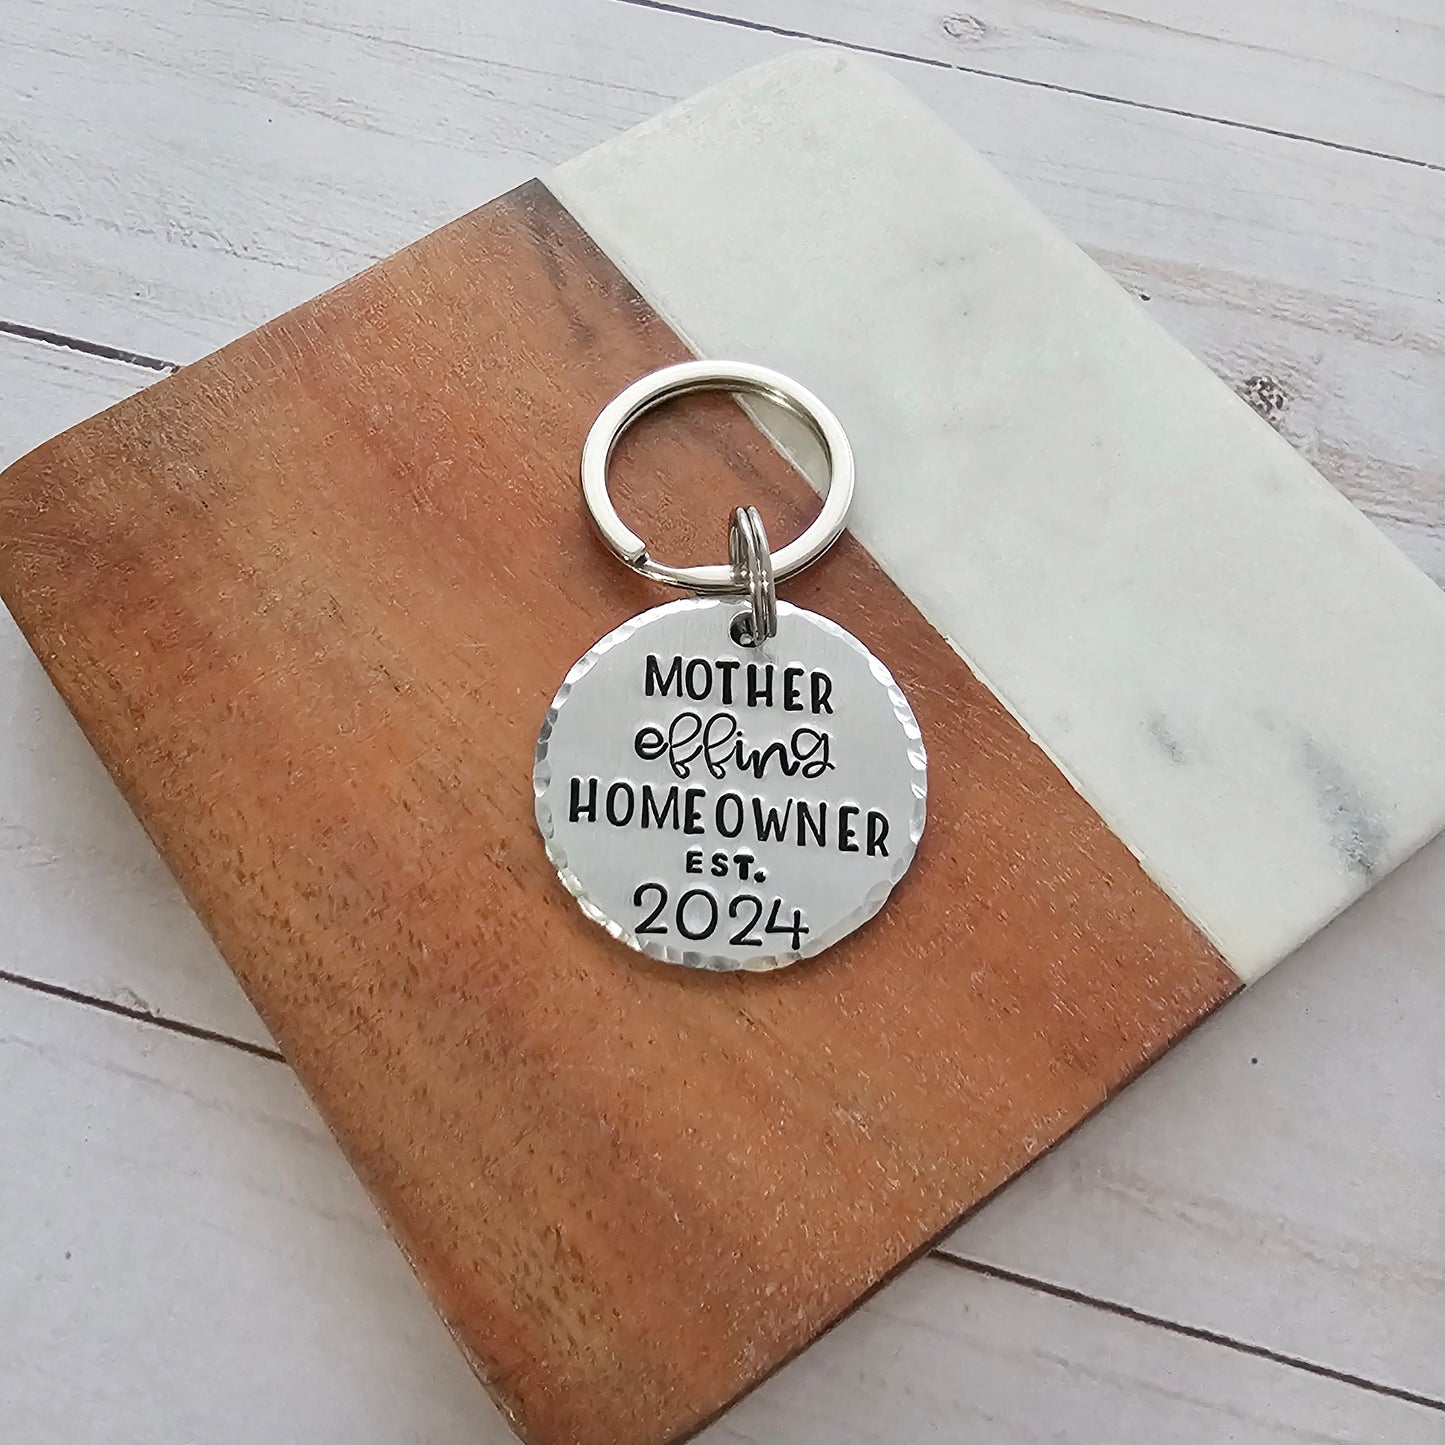 Mother Effing Homeowner Key Chain with Year Est, Funny Housewarming Gift for Women, First House Accessories, Closing Gift for Home Buyer